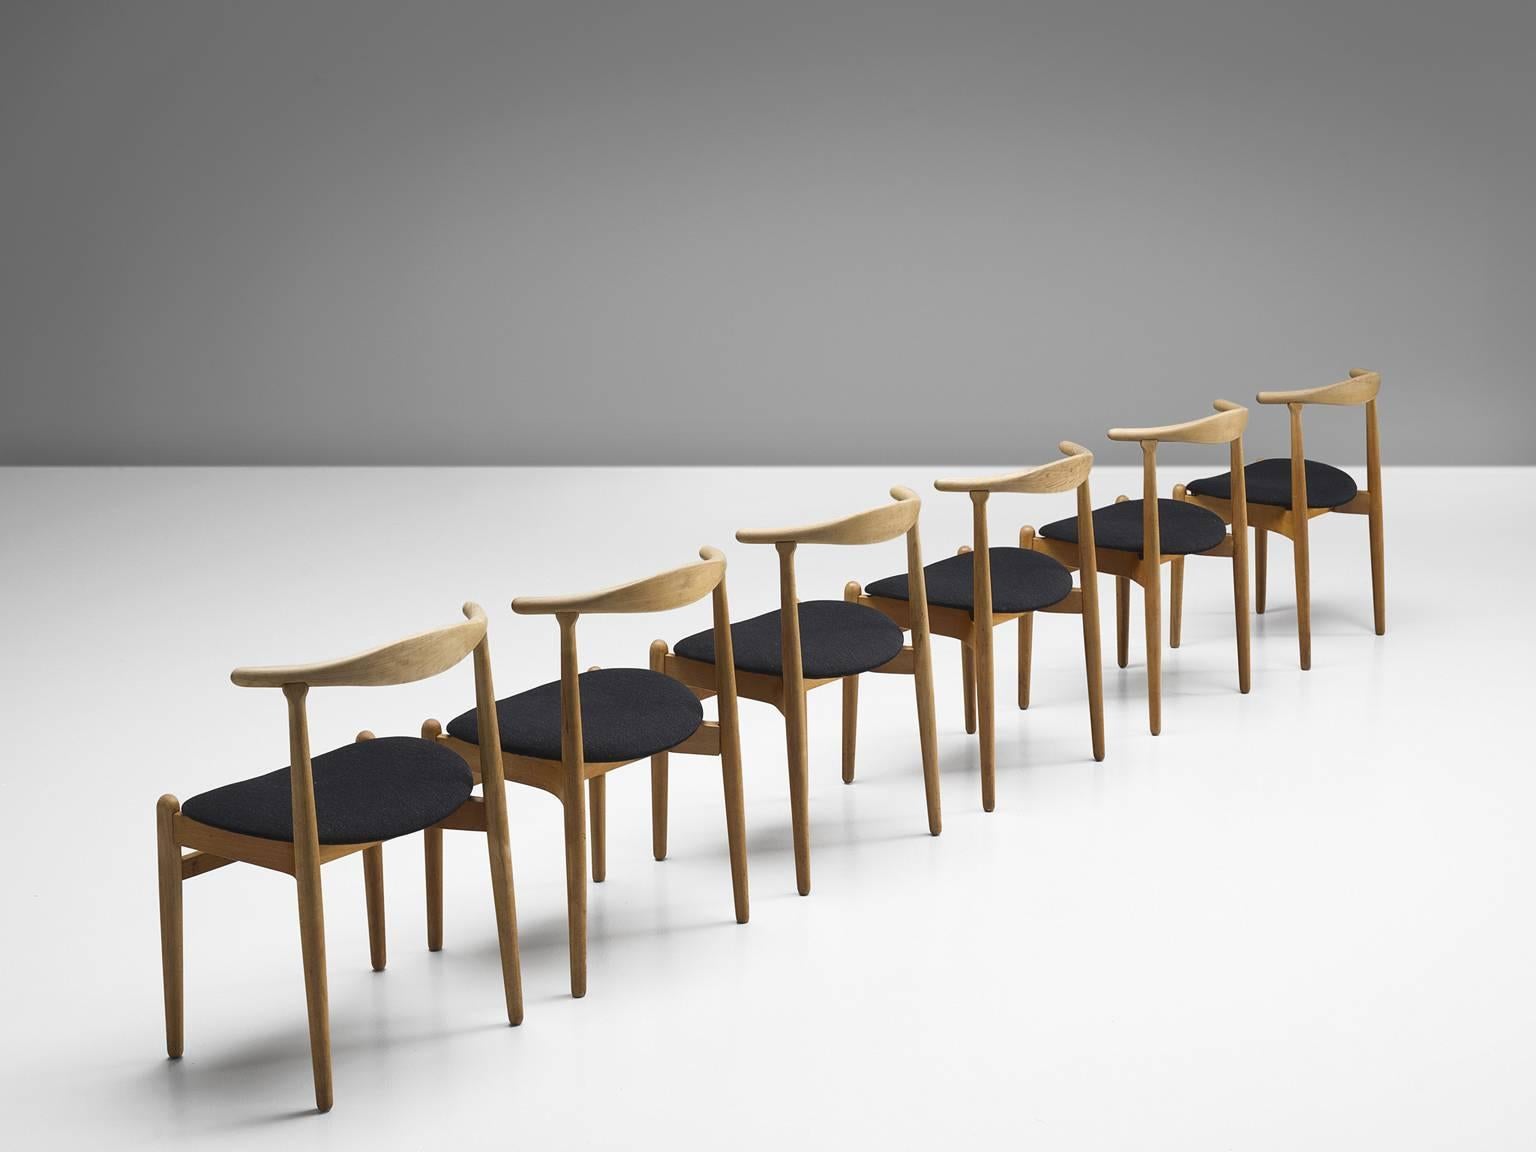 Hans Wegner, dining chairs model FH 1934, oak and fabric, Denmark, 1960s. 

These small elegant dining chairs feature a solid wooden curved backrest. There are four straight legs and the two front legs are connected via a horizontal slat. The legs